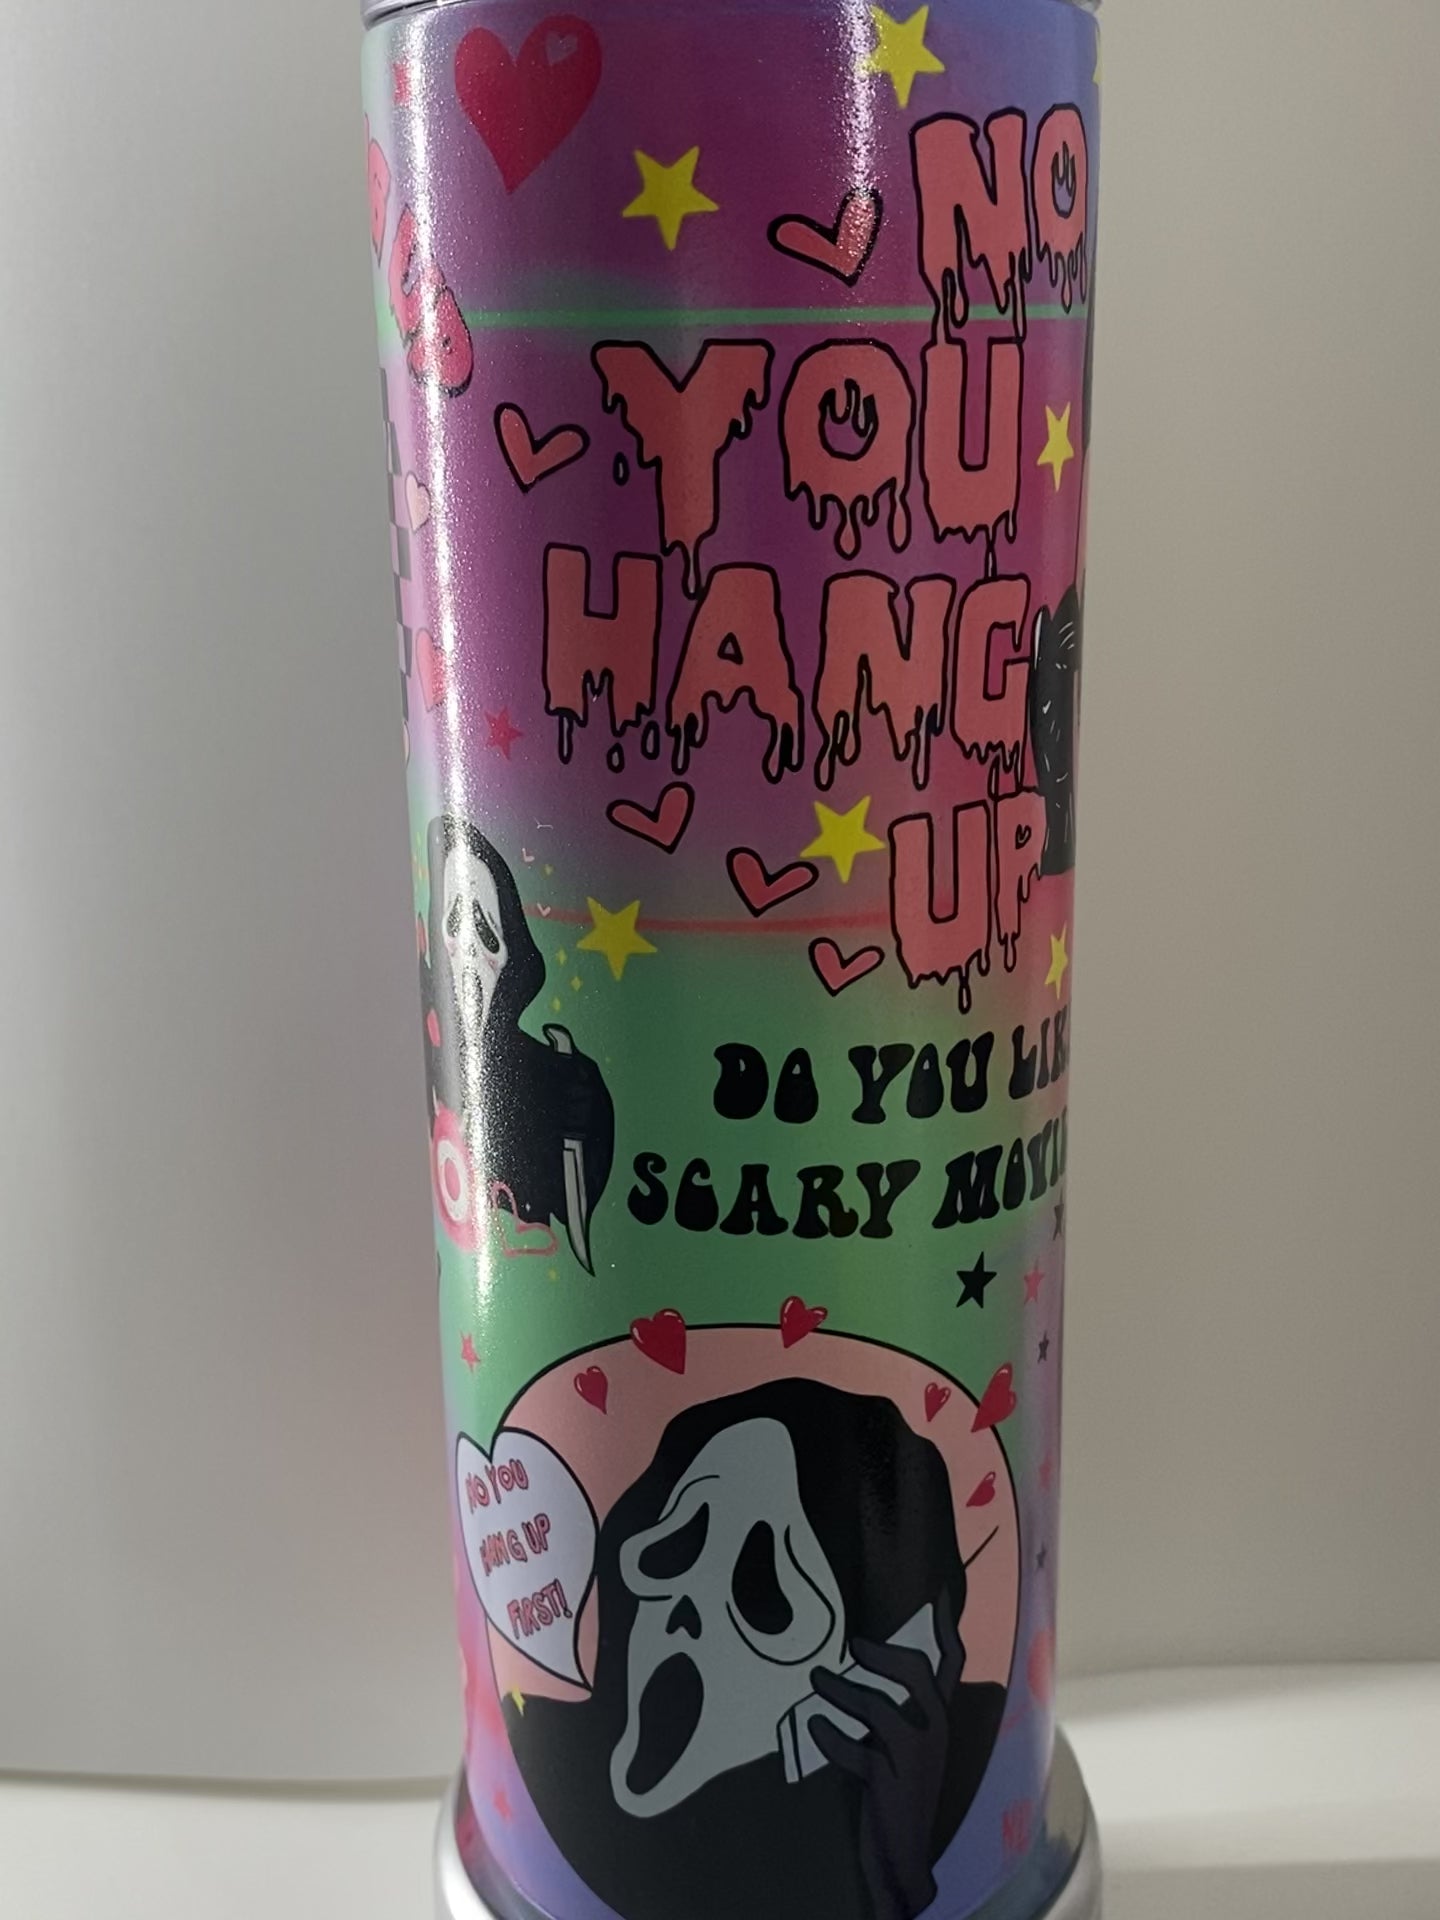 Scream Beverage Buddies Cup unboxing! Going to start my yearly Hallowe